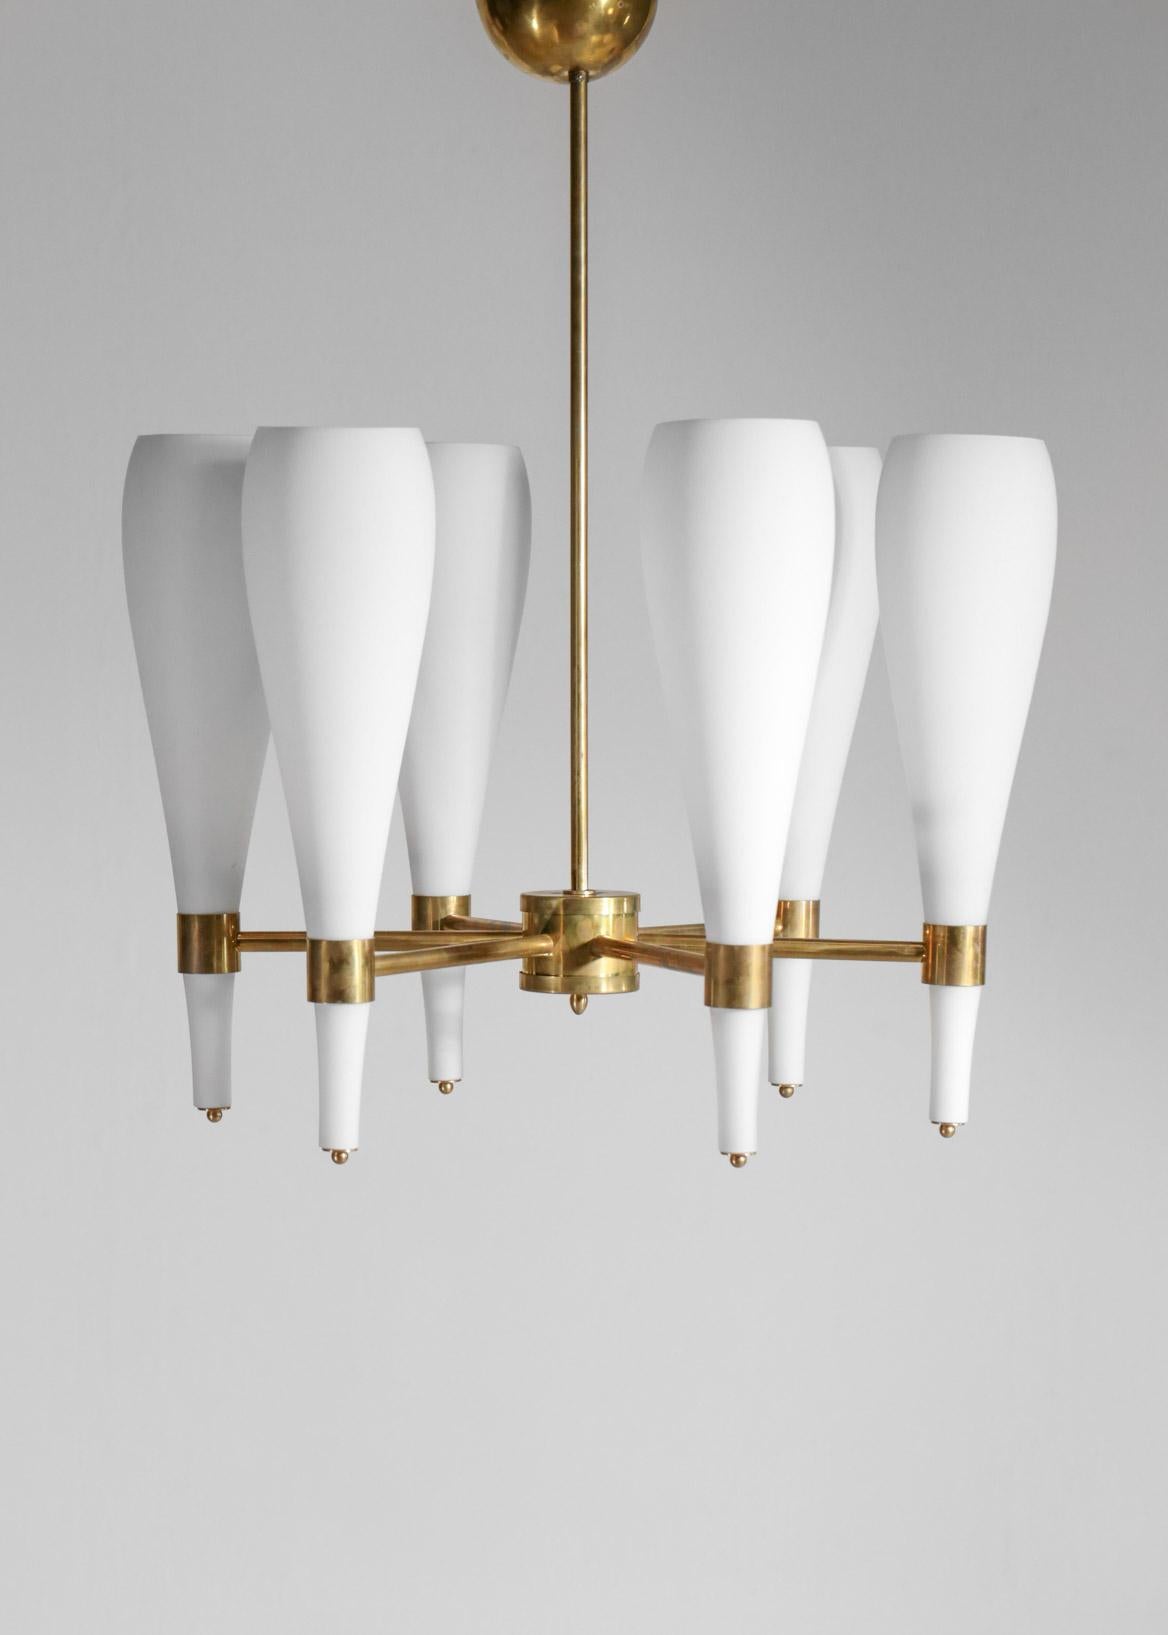 Modern Italian chandelier with 6 opaline glass (E27 bulb)
Handcrafted in Italy.